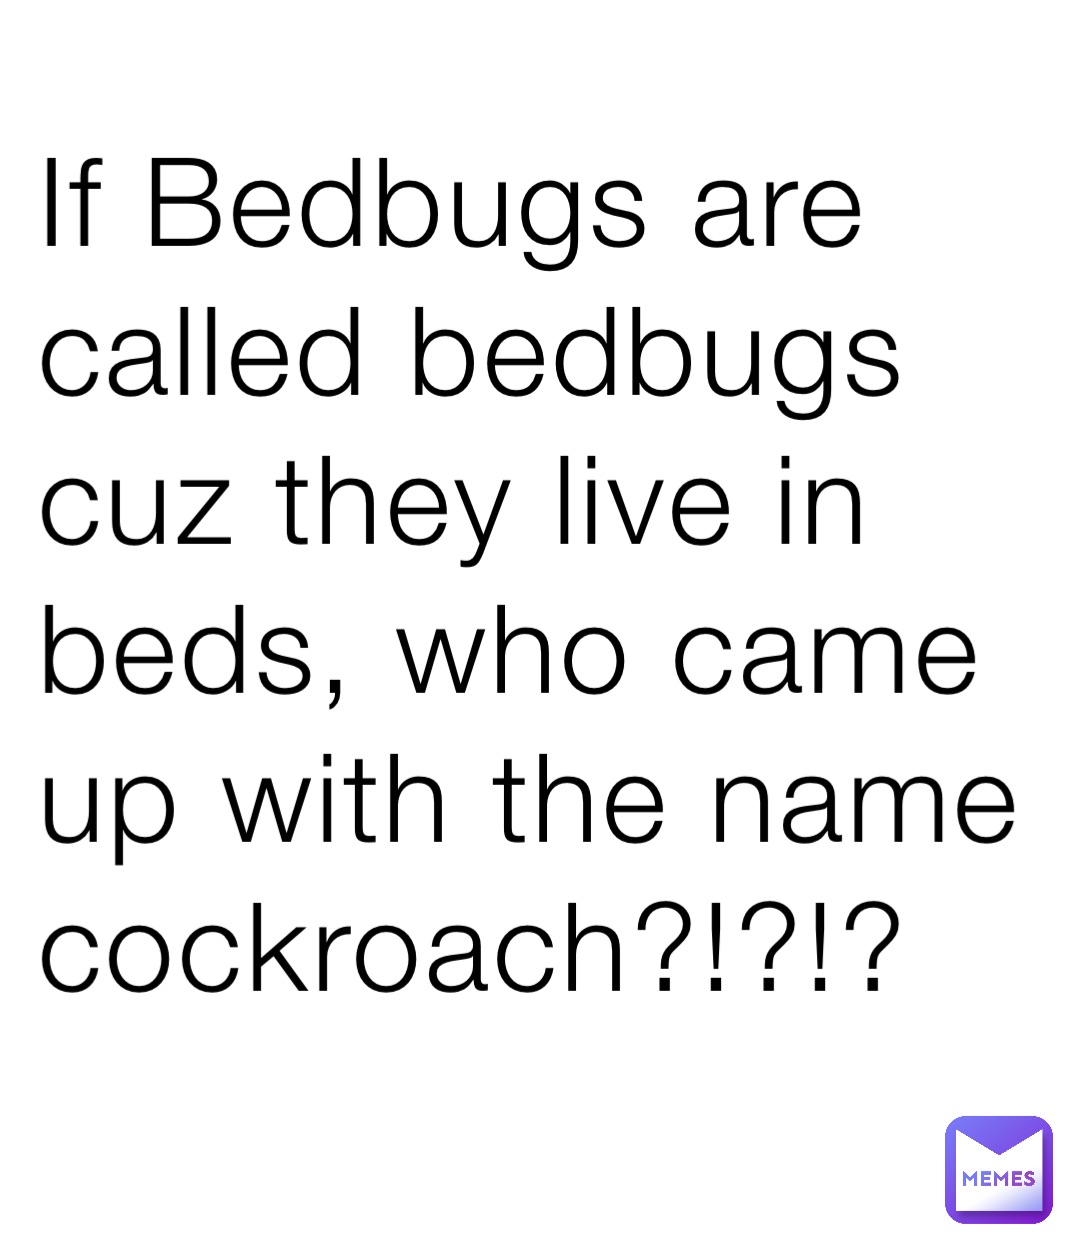 If Bedbugs are called bedbugs cuz they live in beds, who came up with the name cockroach?!?!?